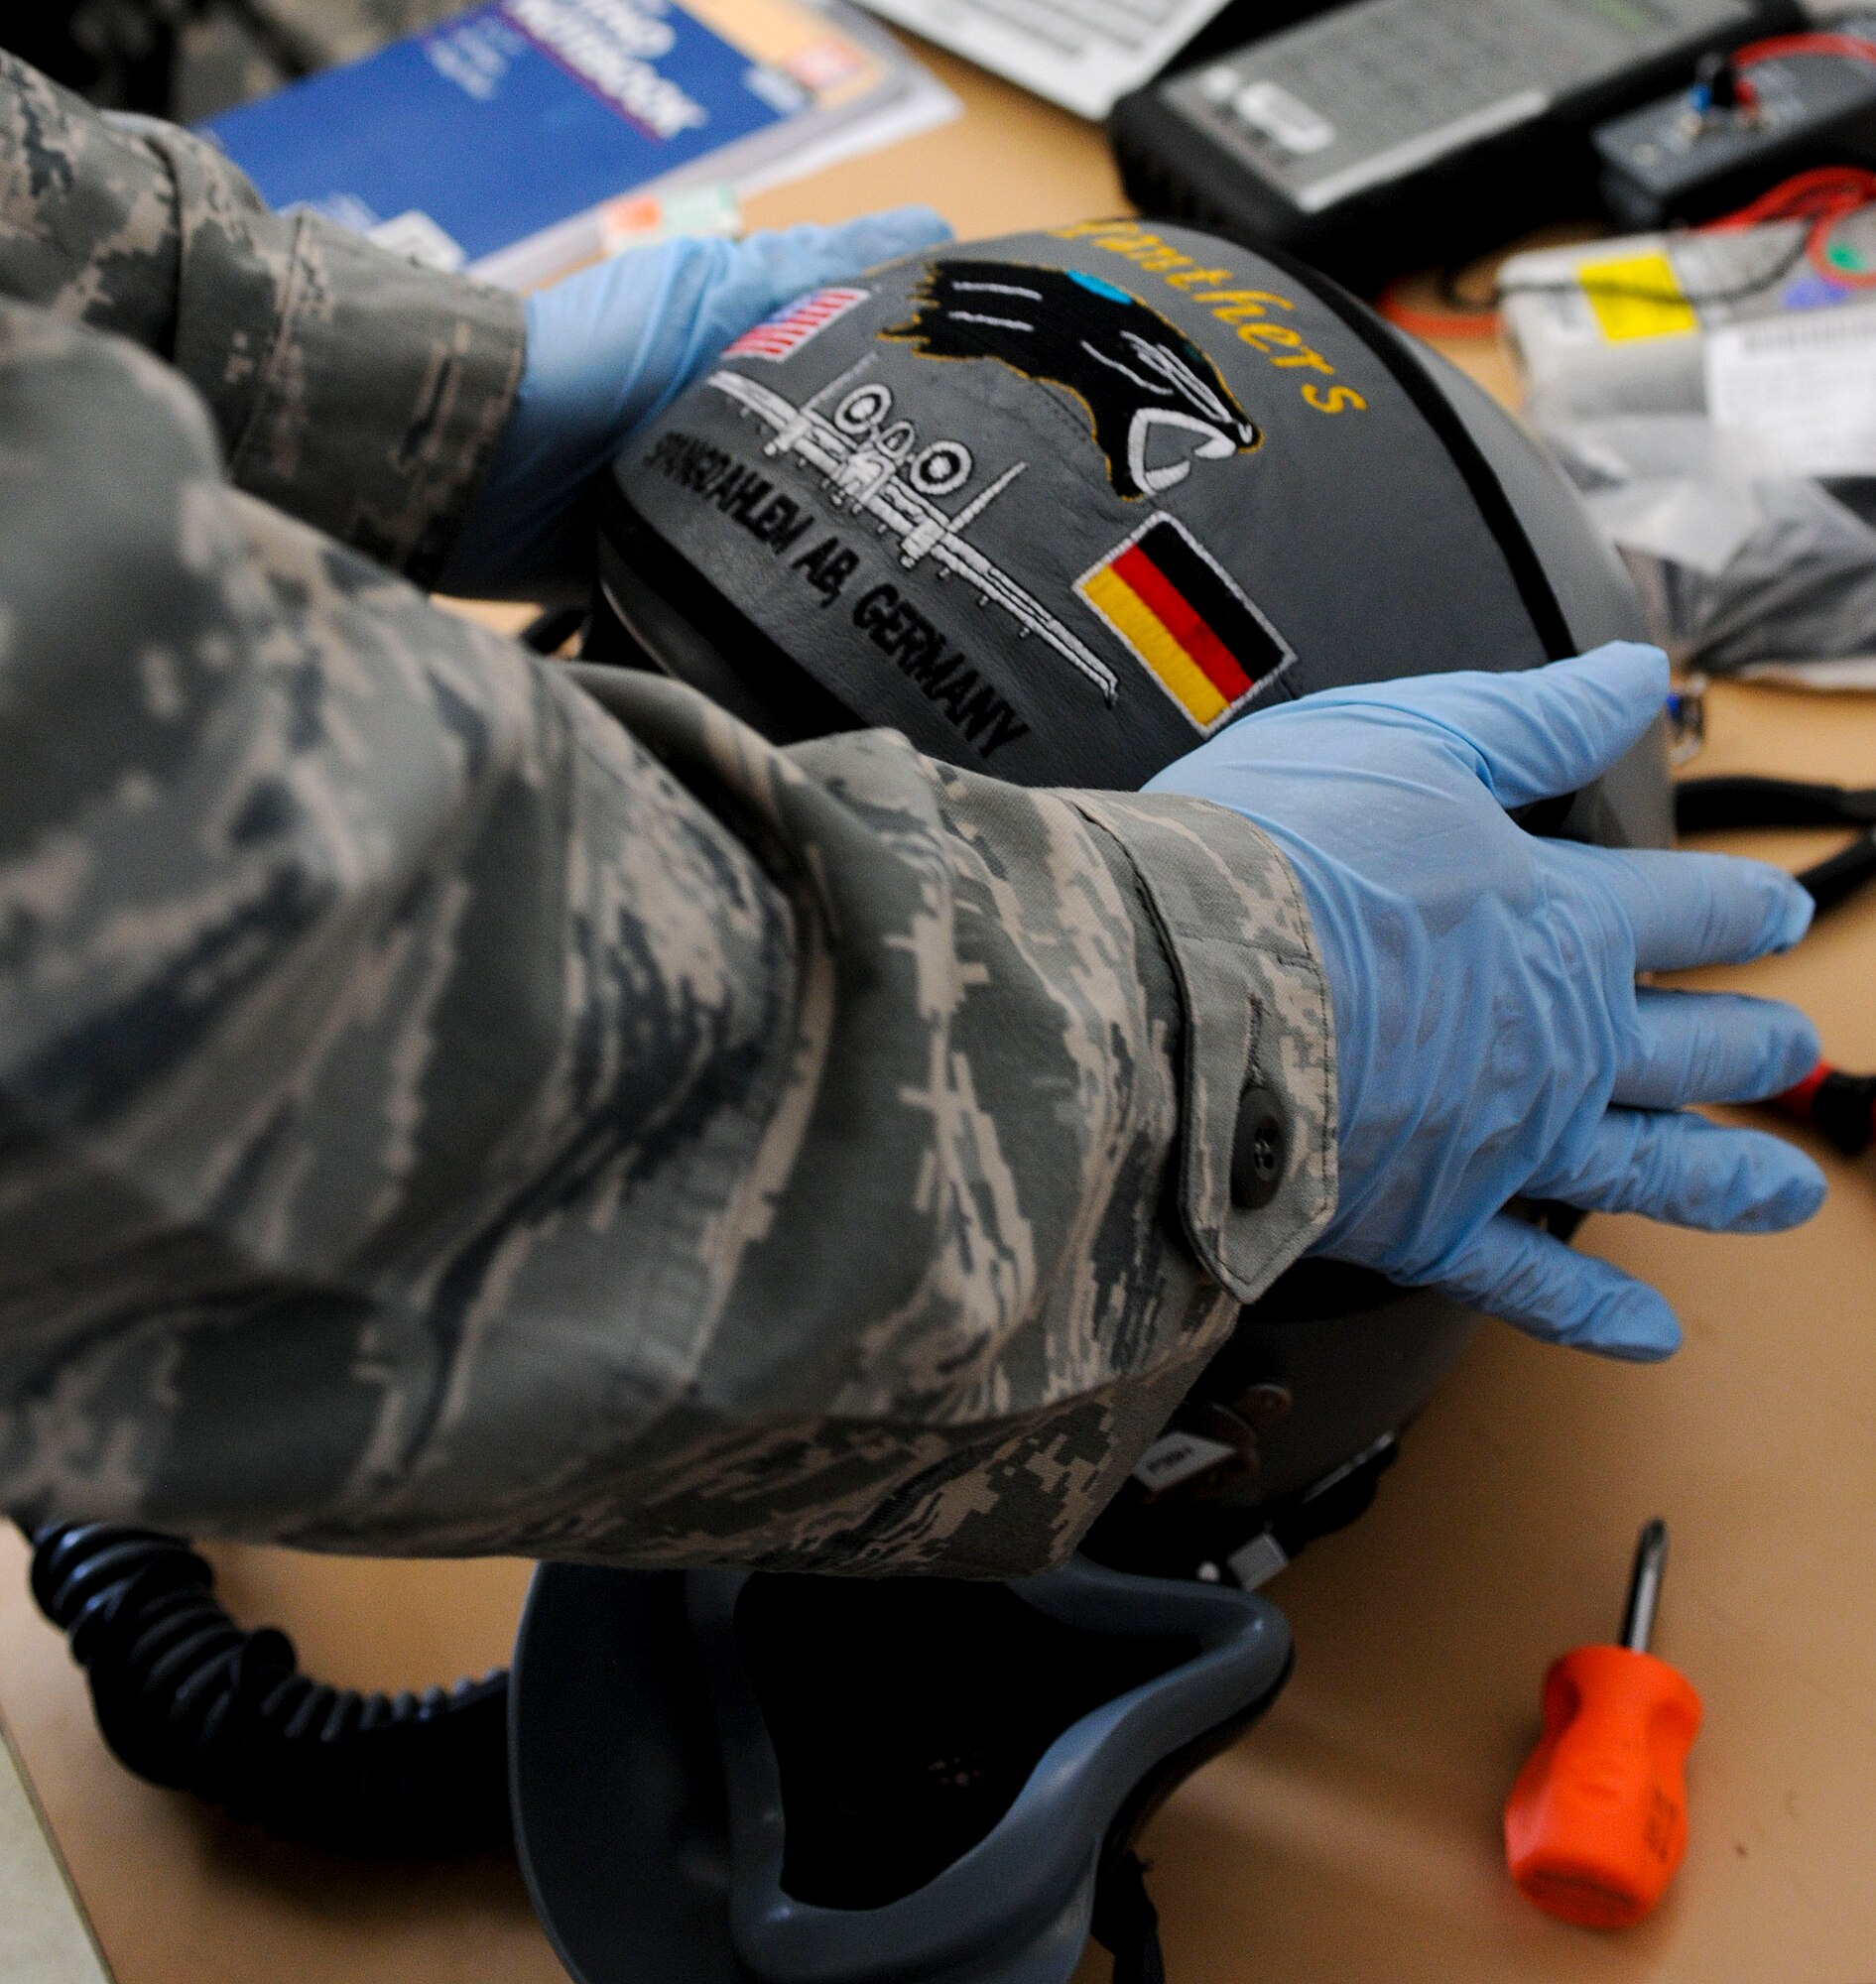 NAMEST AIR BASE, Czech Republic -- Senior Airman Brandon Keiper, 52nd Operations Support Squadron flight crew equipment maintainer, places a cover on the visor of an A-10 Thunderbolt II pilot's helmet as part of a 30 day inspection Sept. 10, during Ramstein Rover 2012 here. During these inspections, equipment maintainers disassemble and clean flight equipment to ensure the parts are ready for flying missions. RARO 12 is a NATO partnership building exercise invlolving more than 16 nations. A-10 Thunderbolt IIs from the 81st Fighter Squadron are participating in the exercise to provide close air support to partnering nations and practice forward air control missions with their NATO allies in international sercurity assistance force realistic scenarios. Participating in exercises like RARO 12 ensures effective employment of airpower in support of alliance or coallition forces while mitigating risks to civilians in contingency operations. (U.S. Air Force photo by Senior Airman Natasha Stannard/Released)